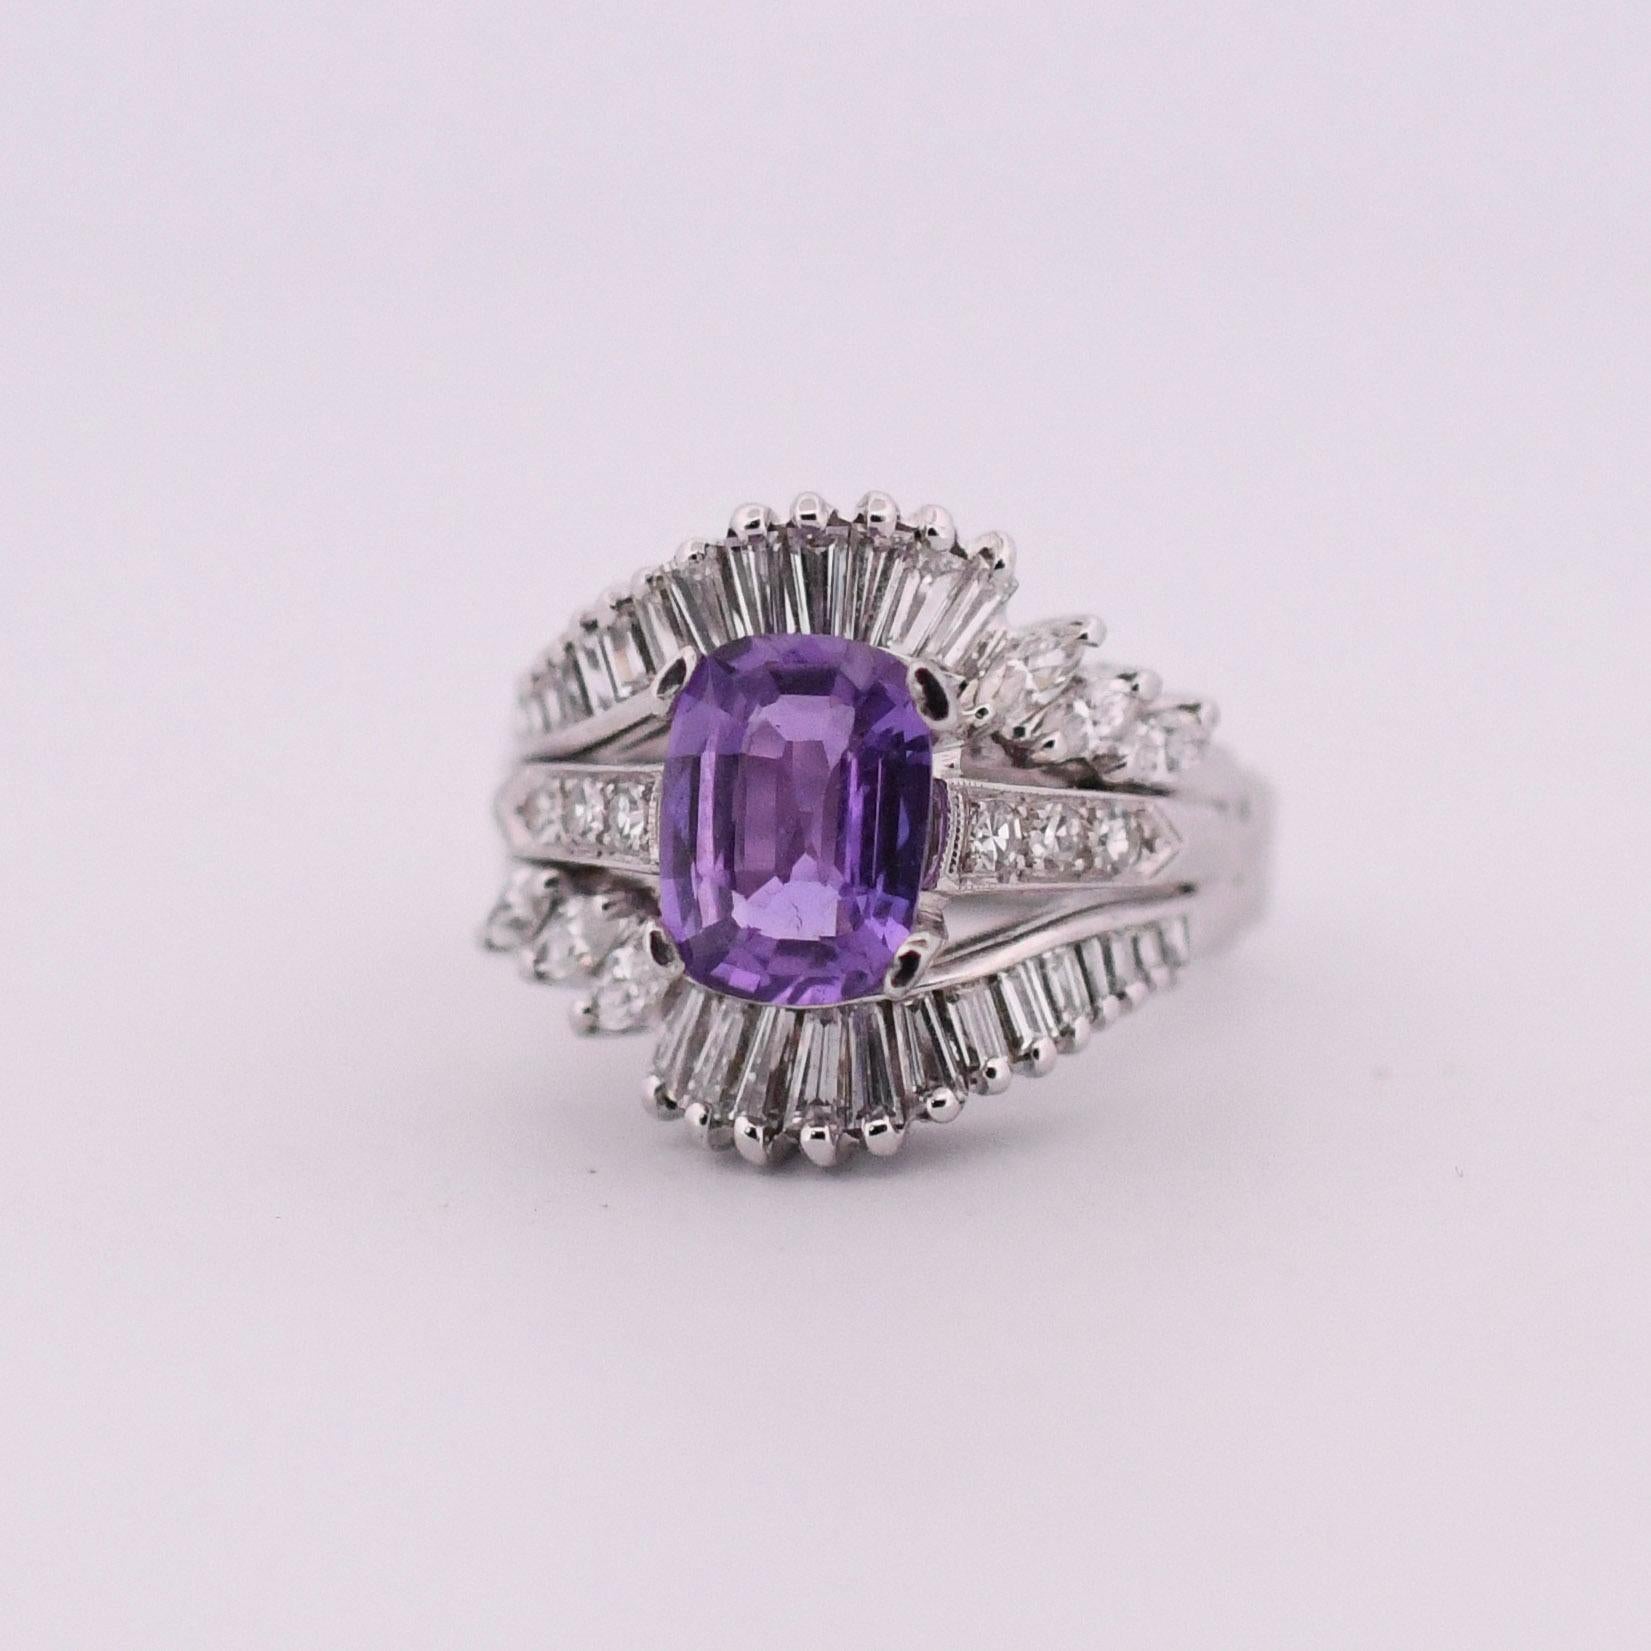 Prepare to be enchanted by the rare and remarkable beauty of this magnificent cocktail ring. At its center lies a breathtaking 2.53-carat Madagascar Purple Sapphire, untouched by heat treatment, making it an exceptionally rare gemstone in its